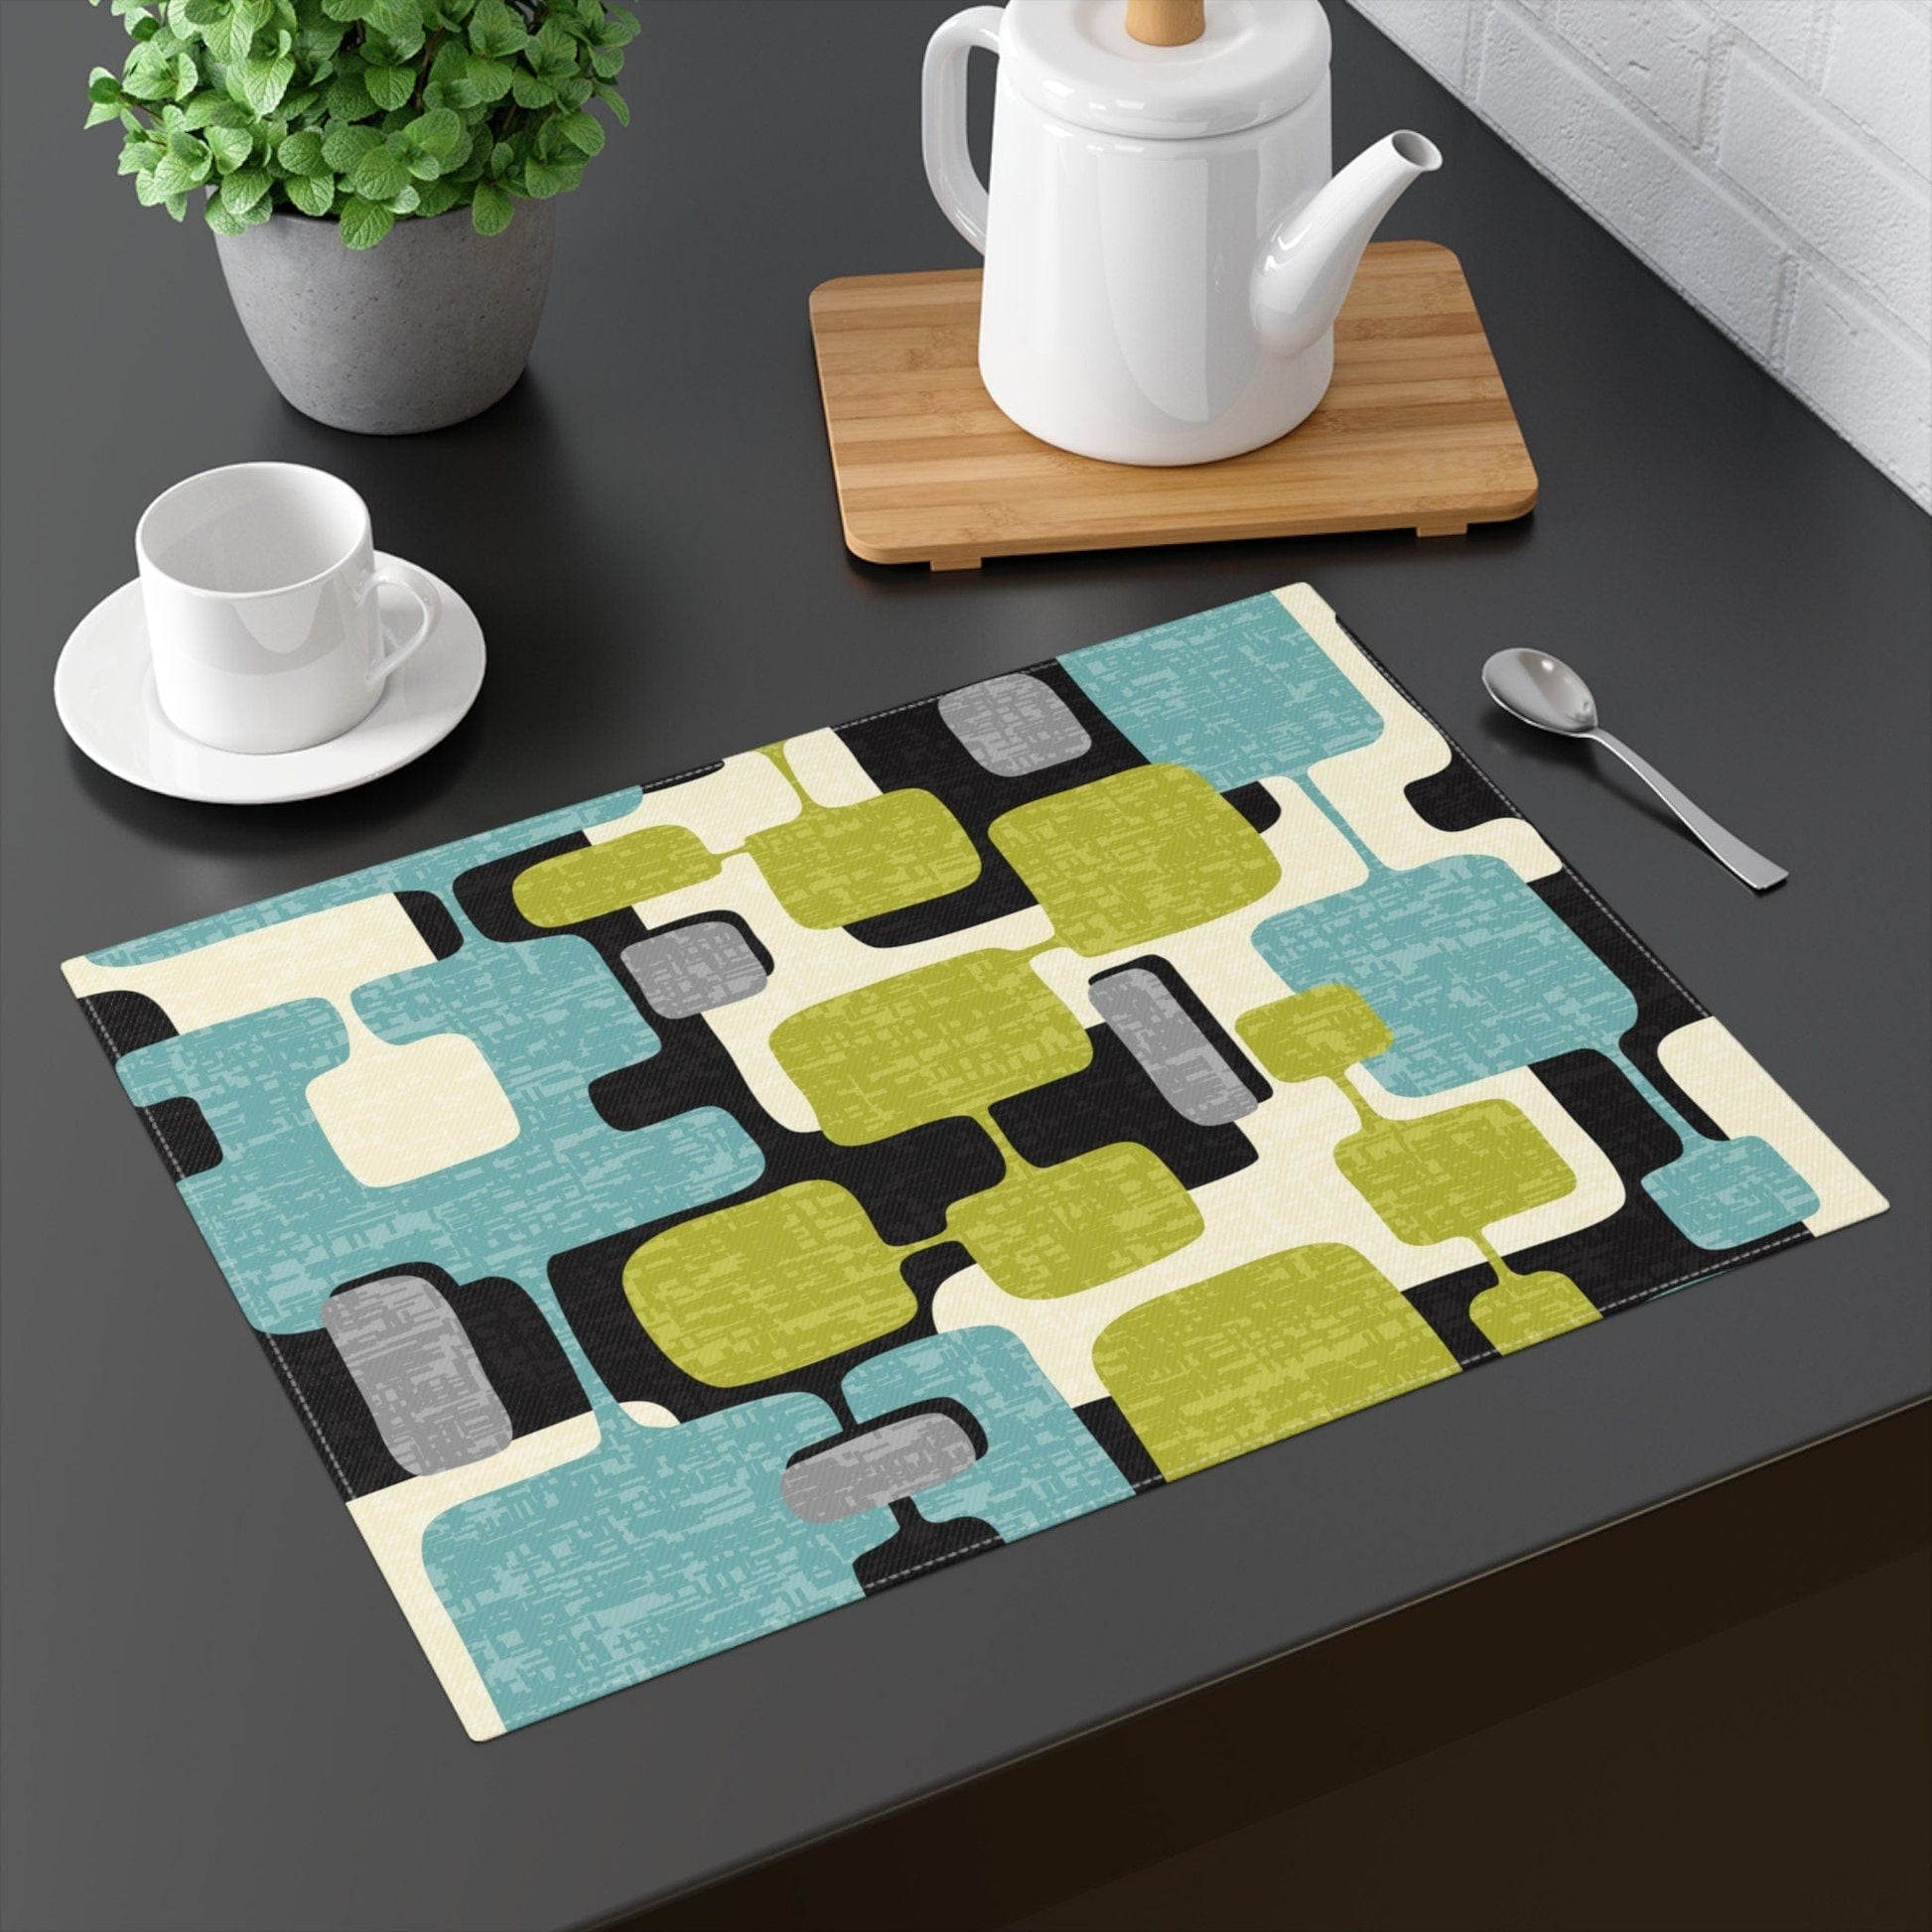 Kate McEnroe New York Mid Century Modern Geometric Abstract Placemats, Retro Teal, Lime Green, Gray, Black MCM Table Linens Placemats 11614579044325381528